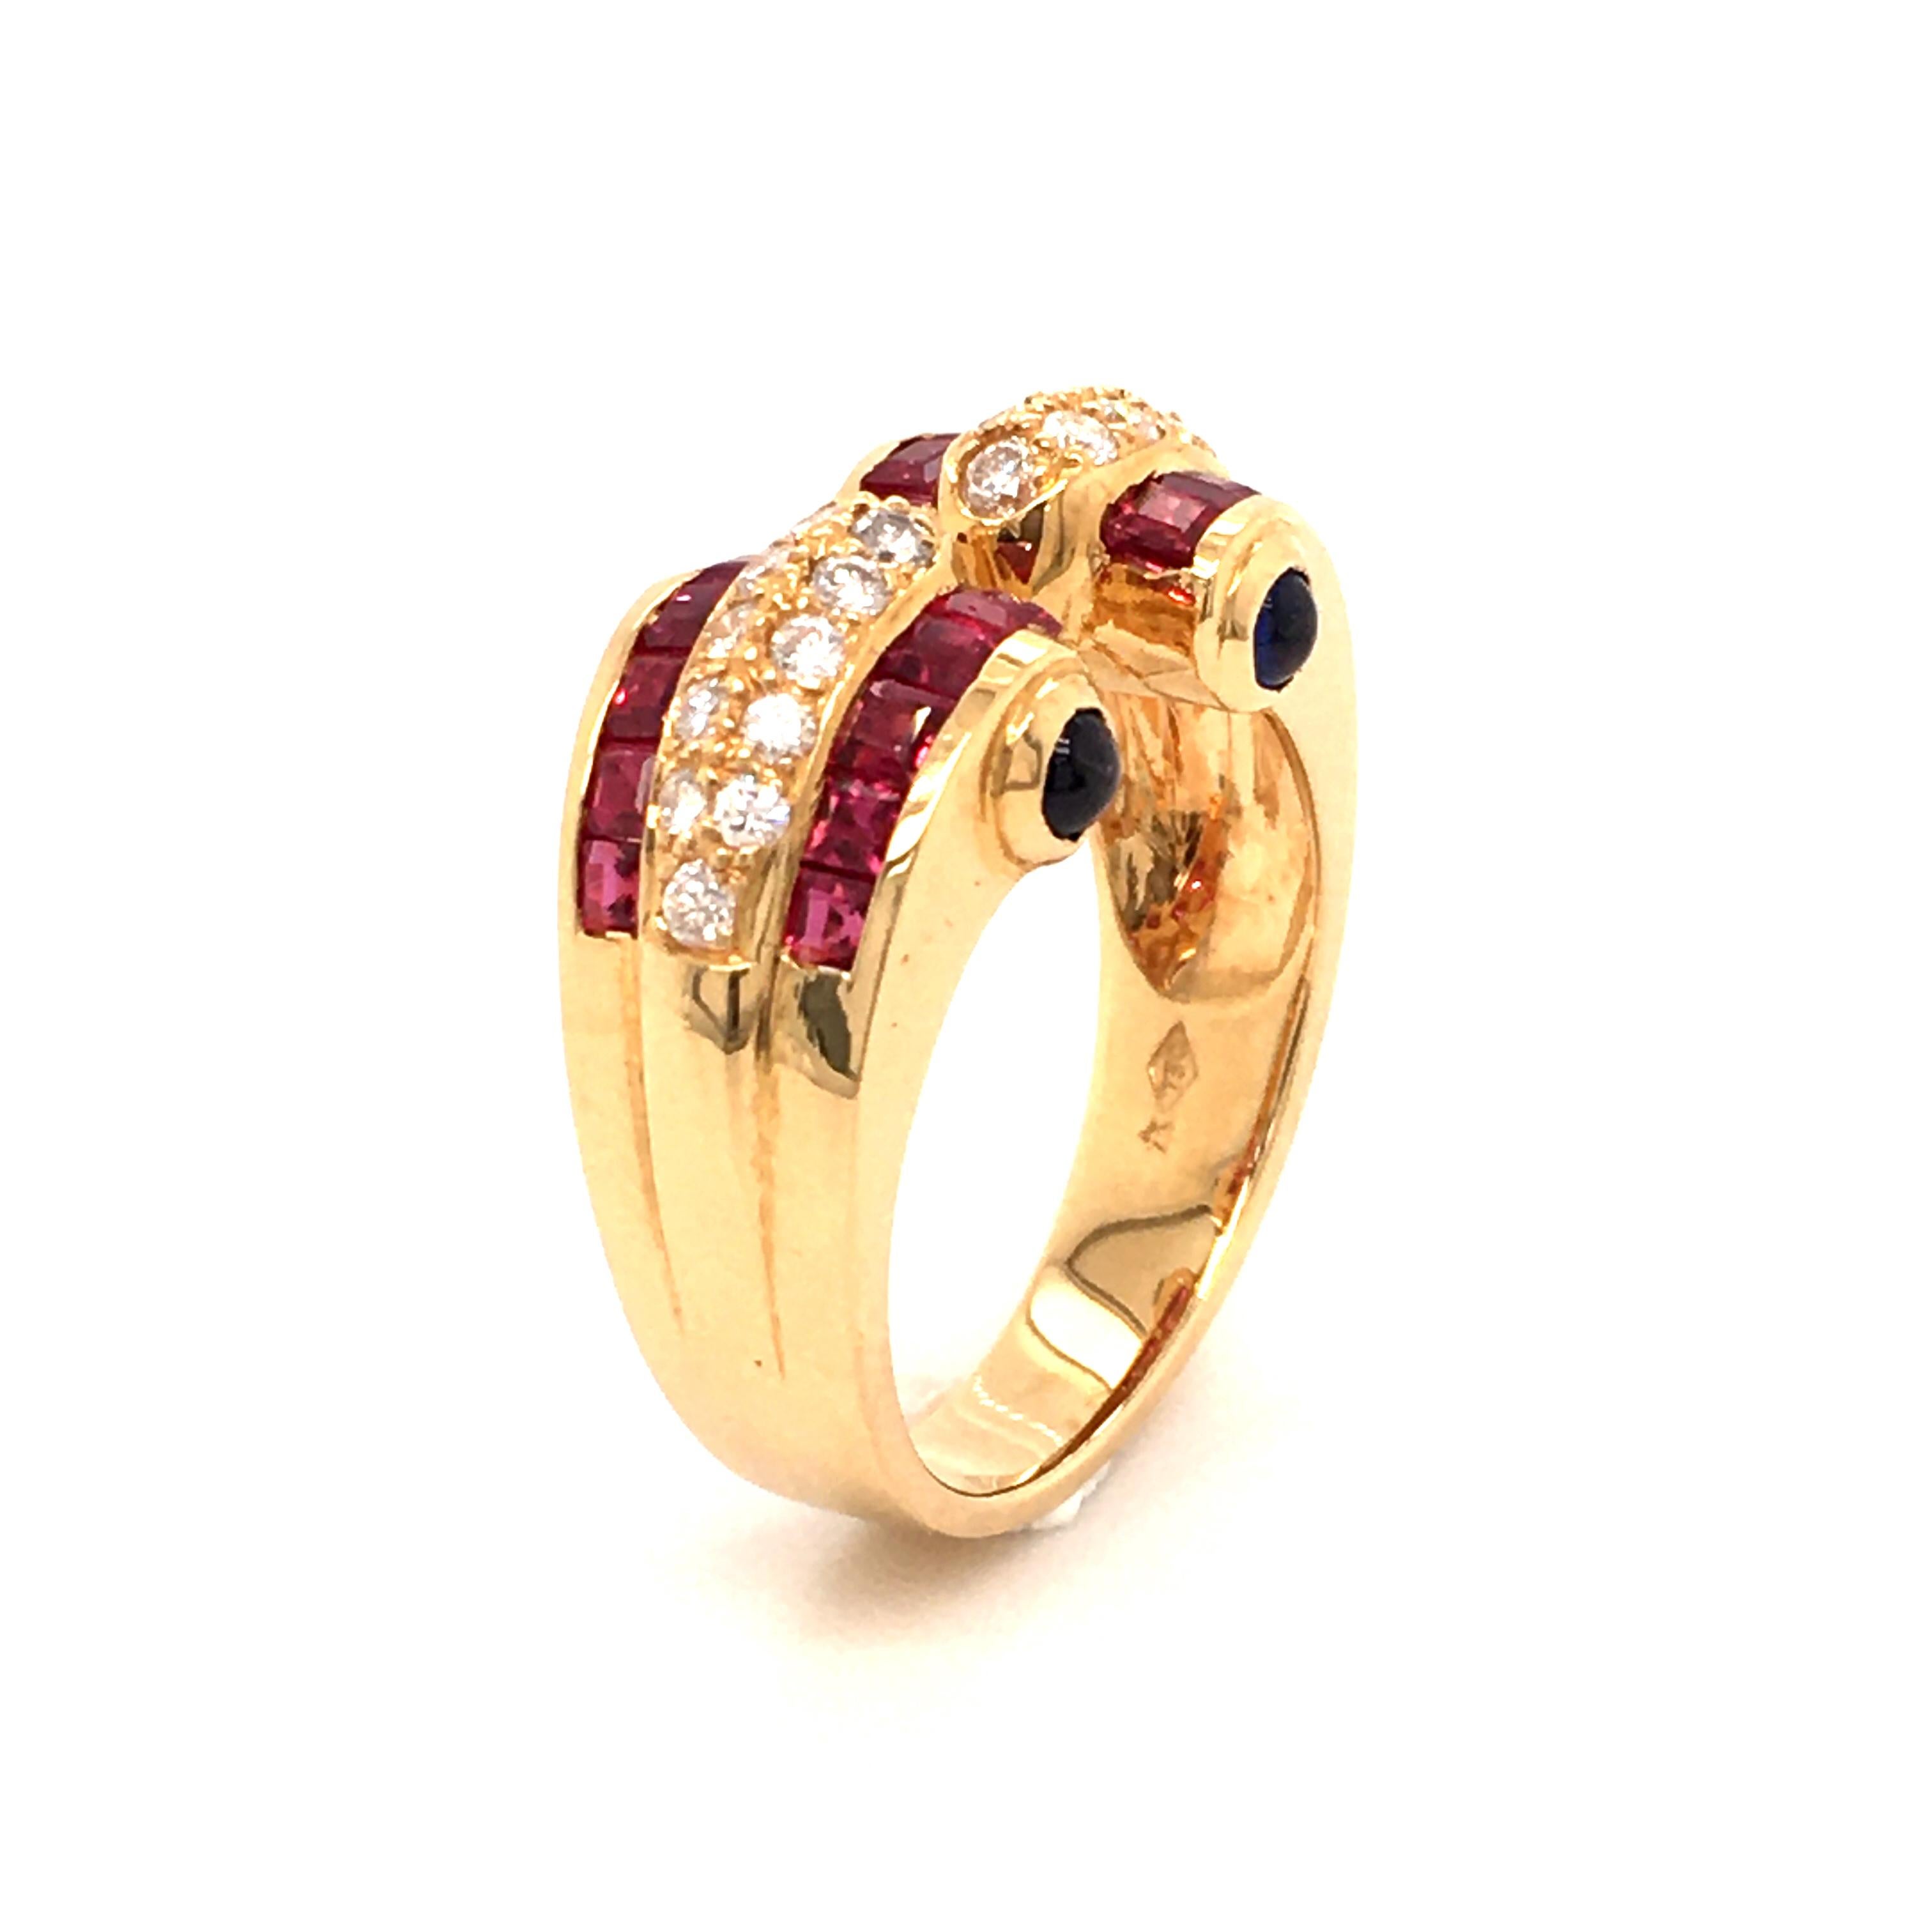 Women's or Men's Ruby, Diamond and Sapphire Ring in 18 Karat Yellow Gold